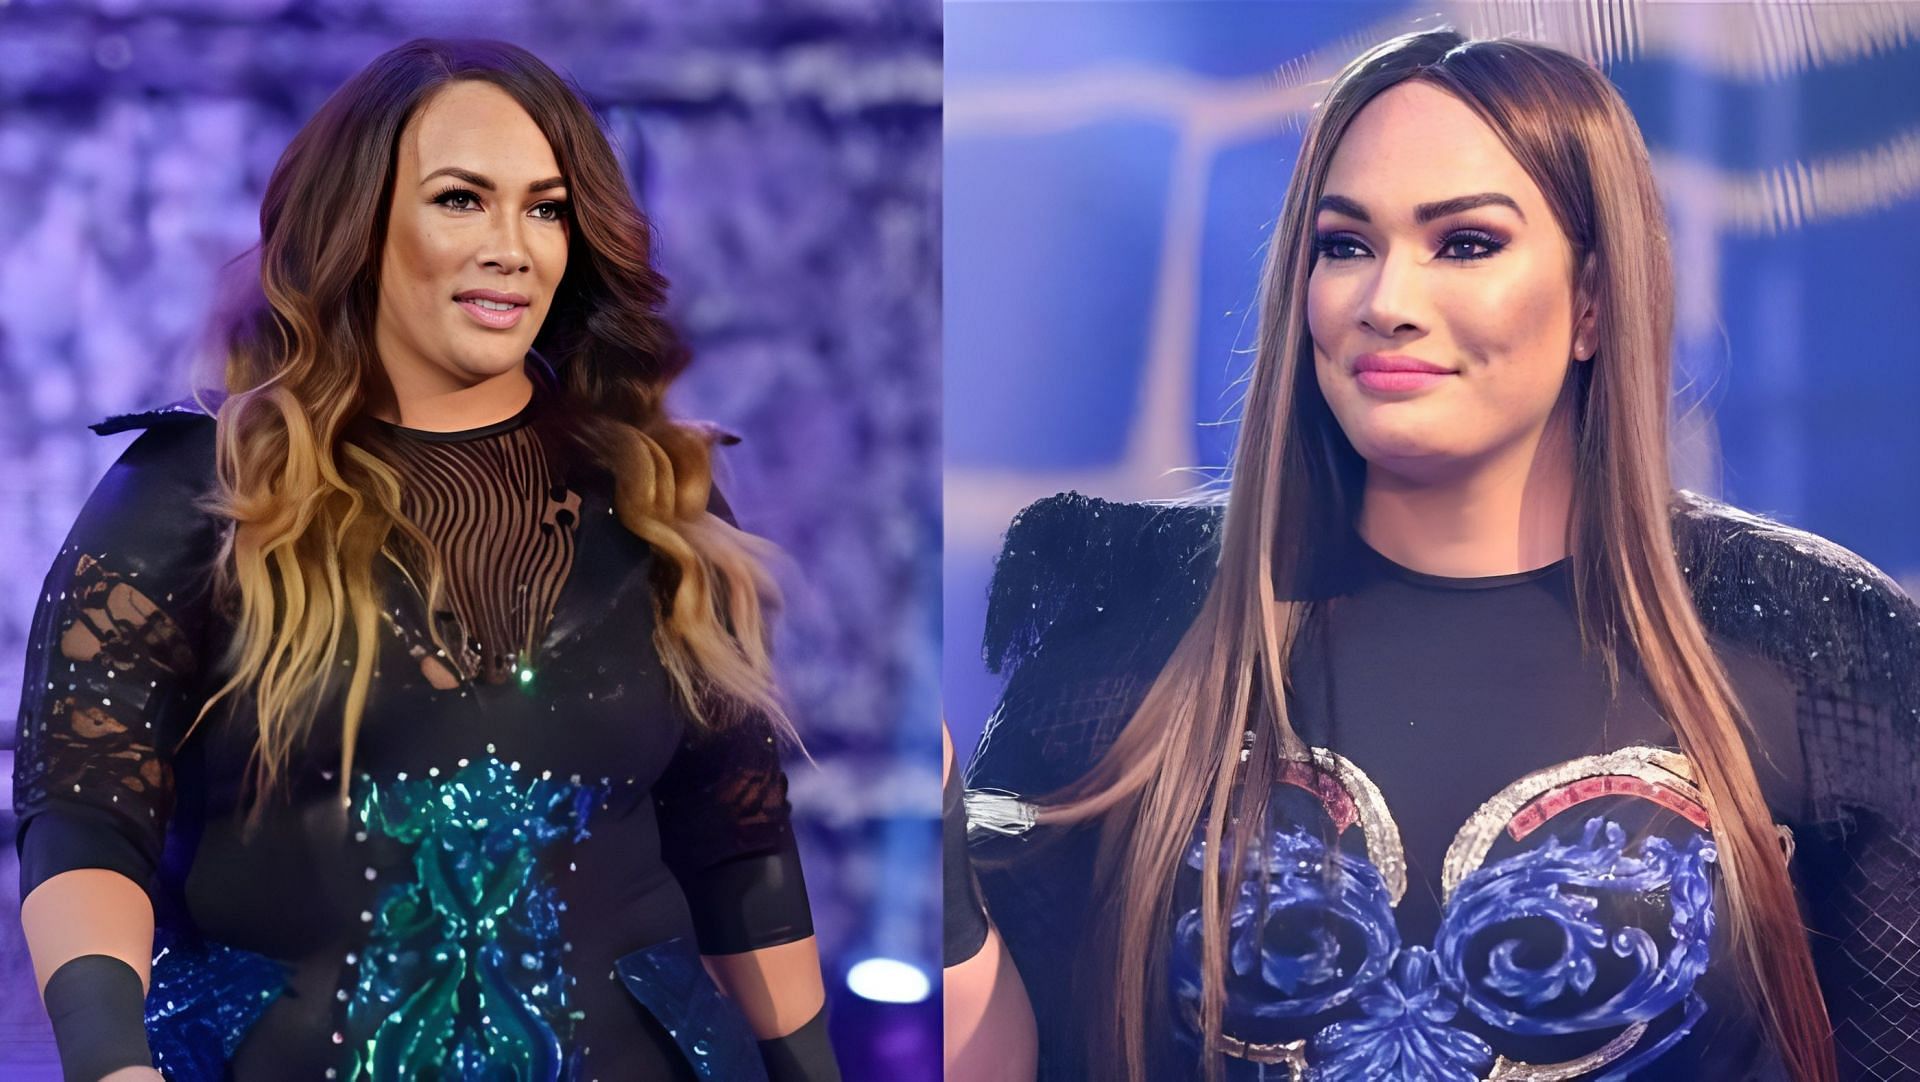 Nia Jax is currently drafted on RAW